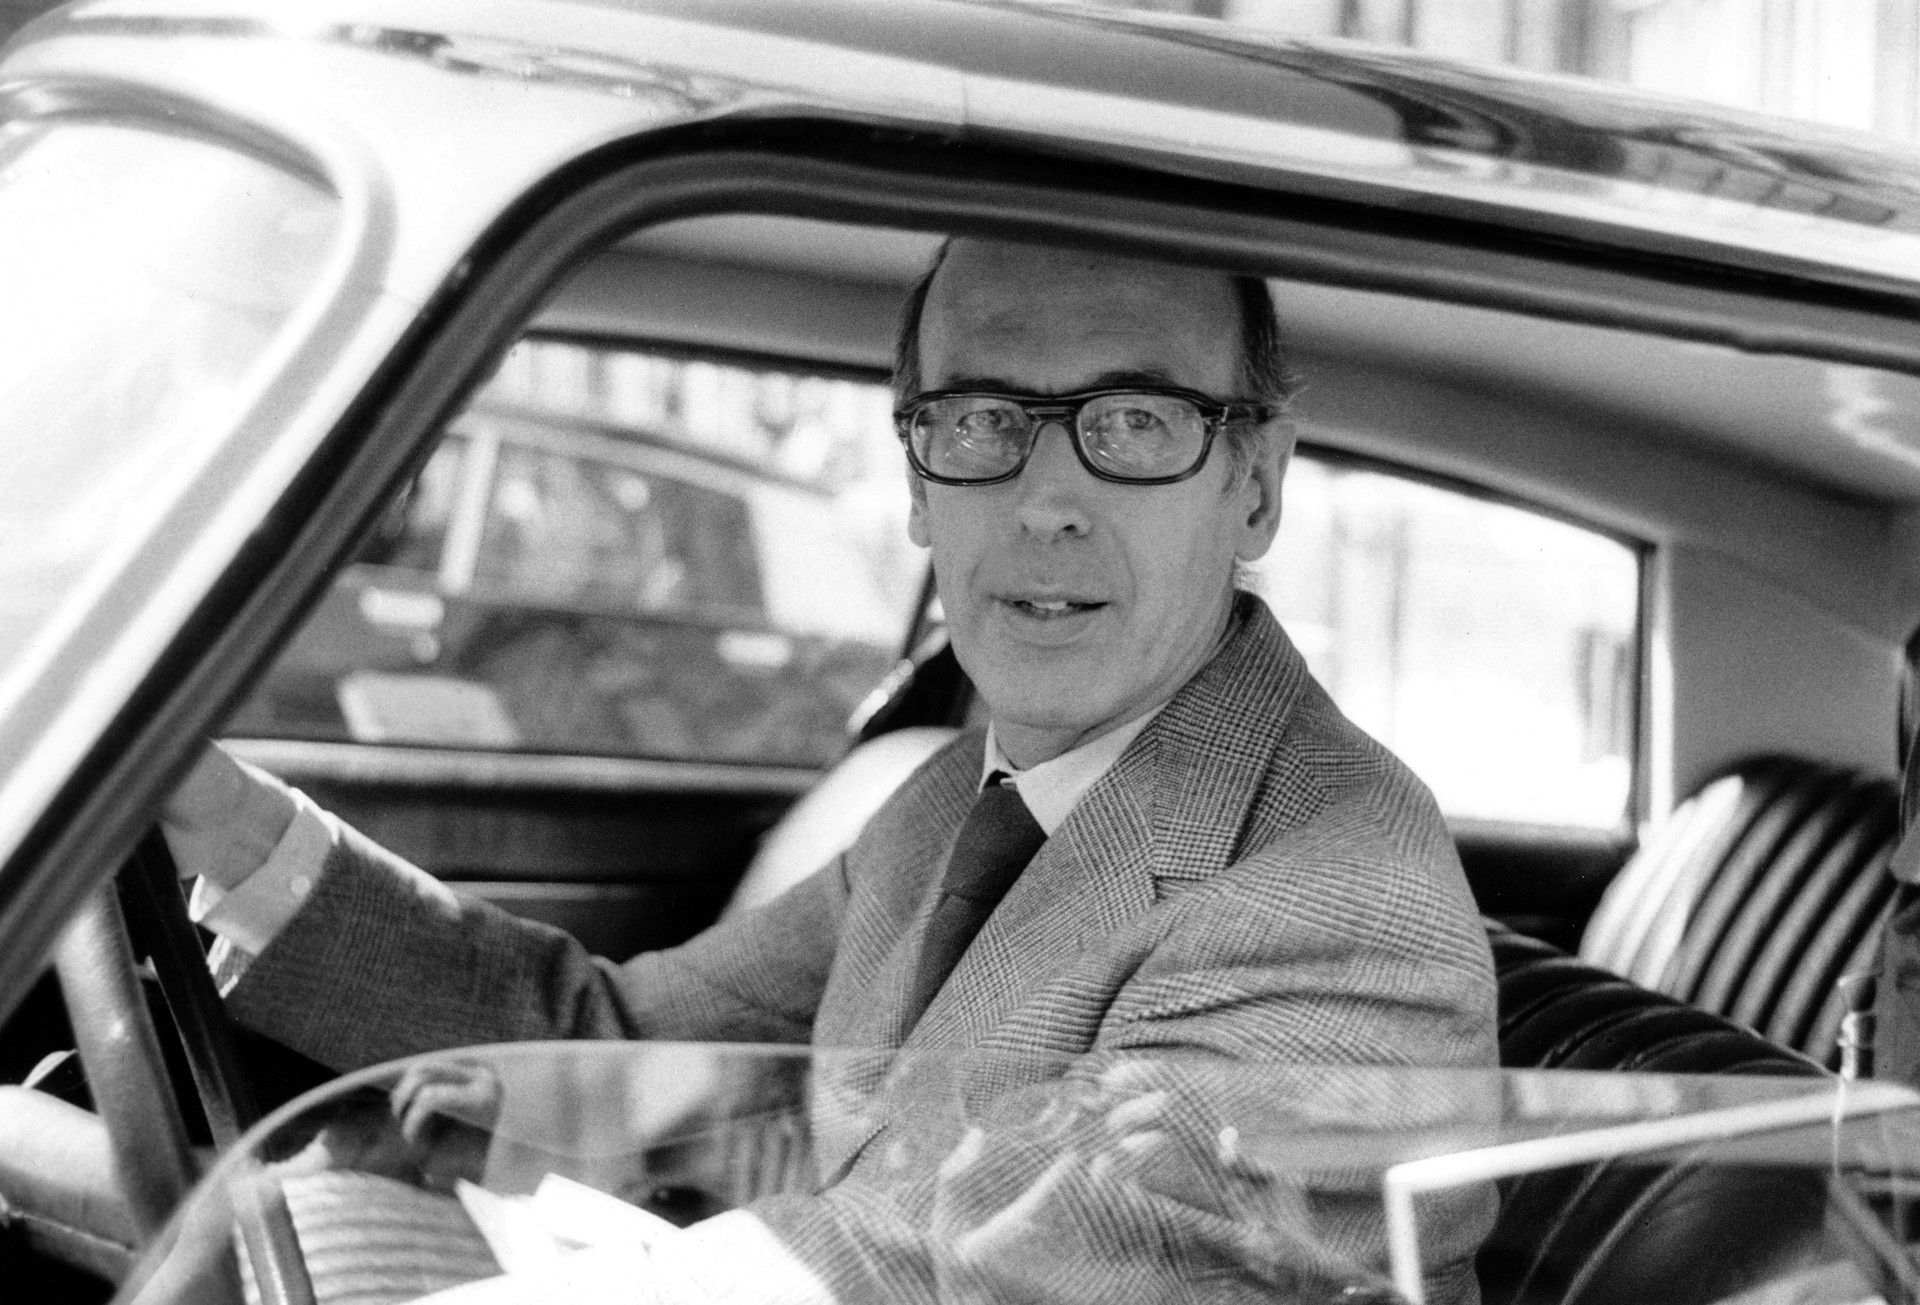 1965, Total et Giscard inventent le hold-up fiscal